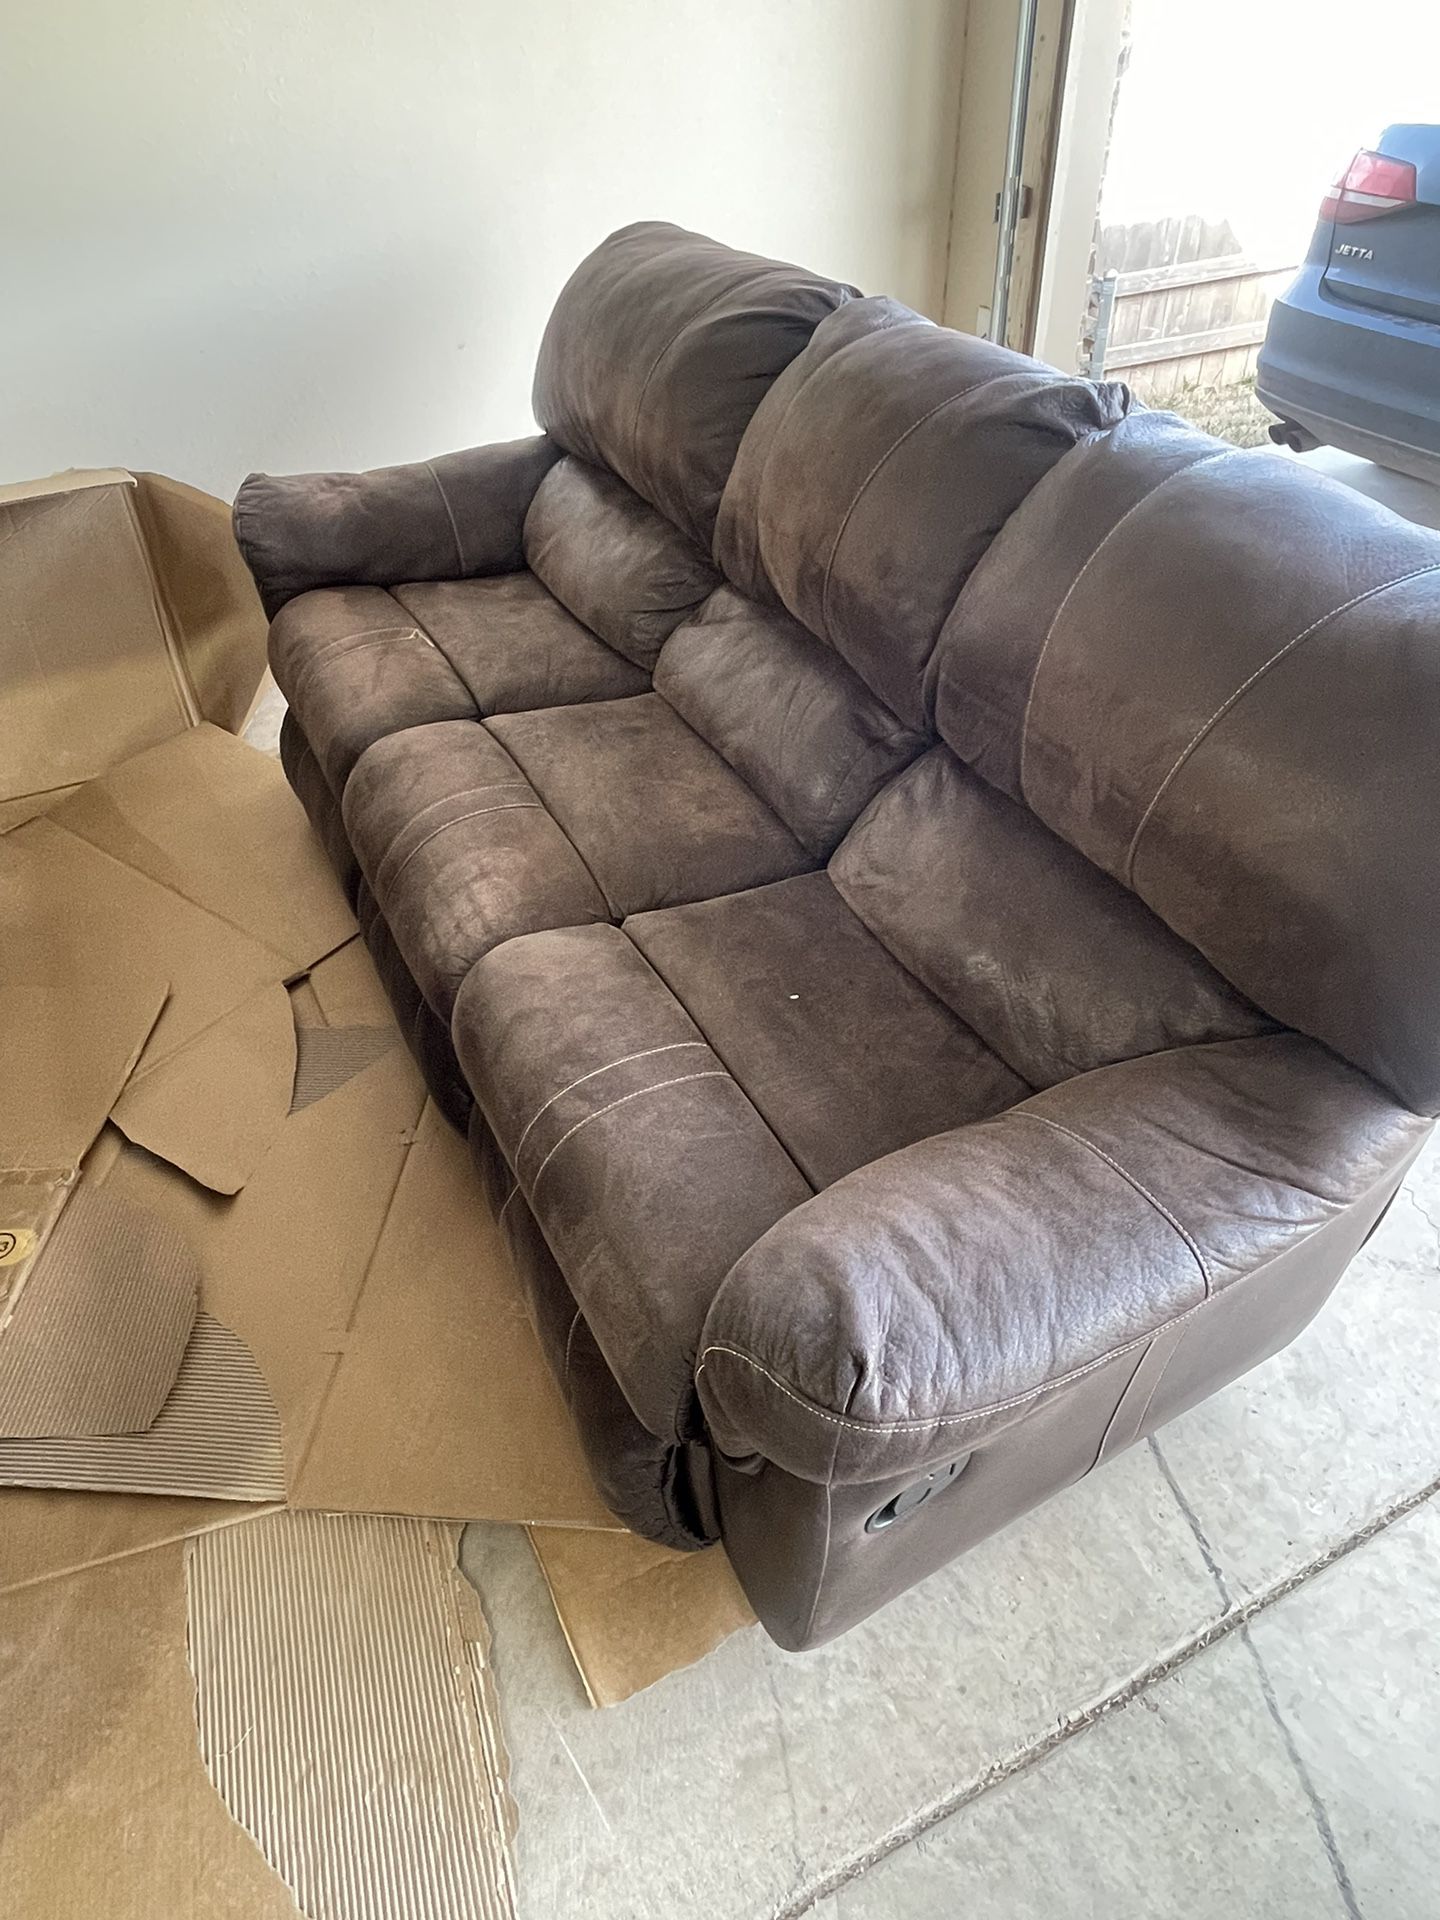 Worn leather Couch Set MUST PICK UP. 